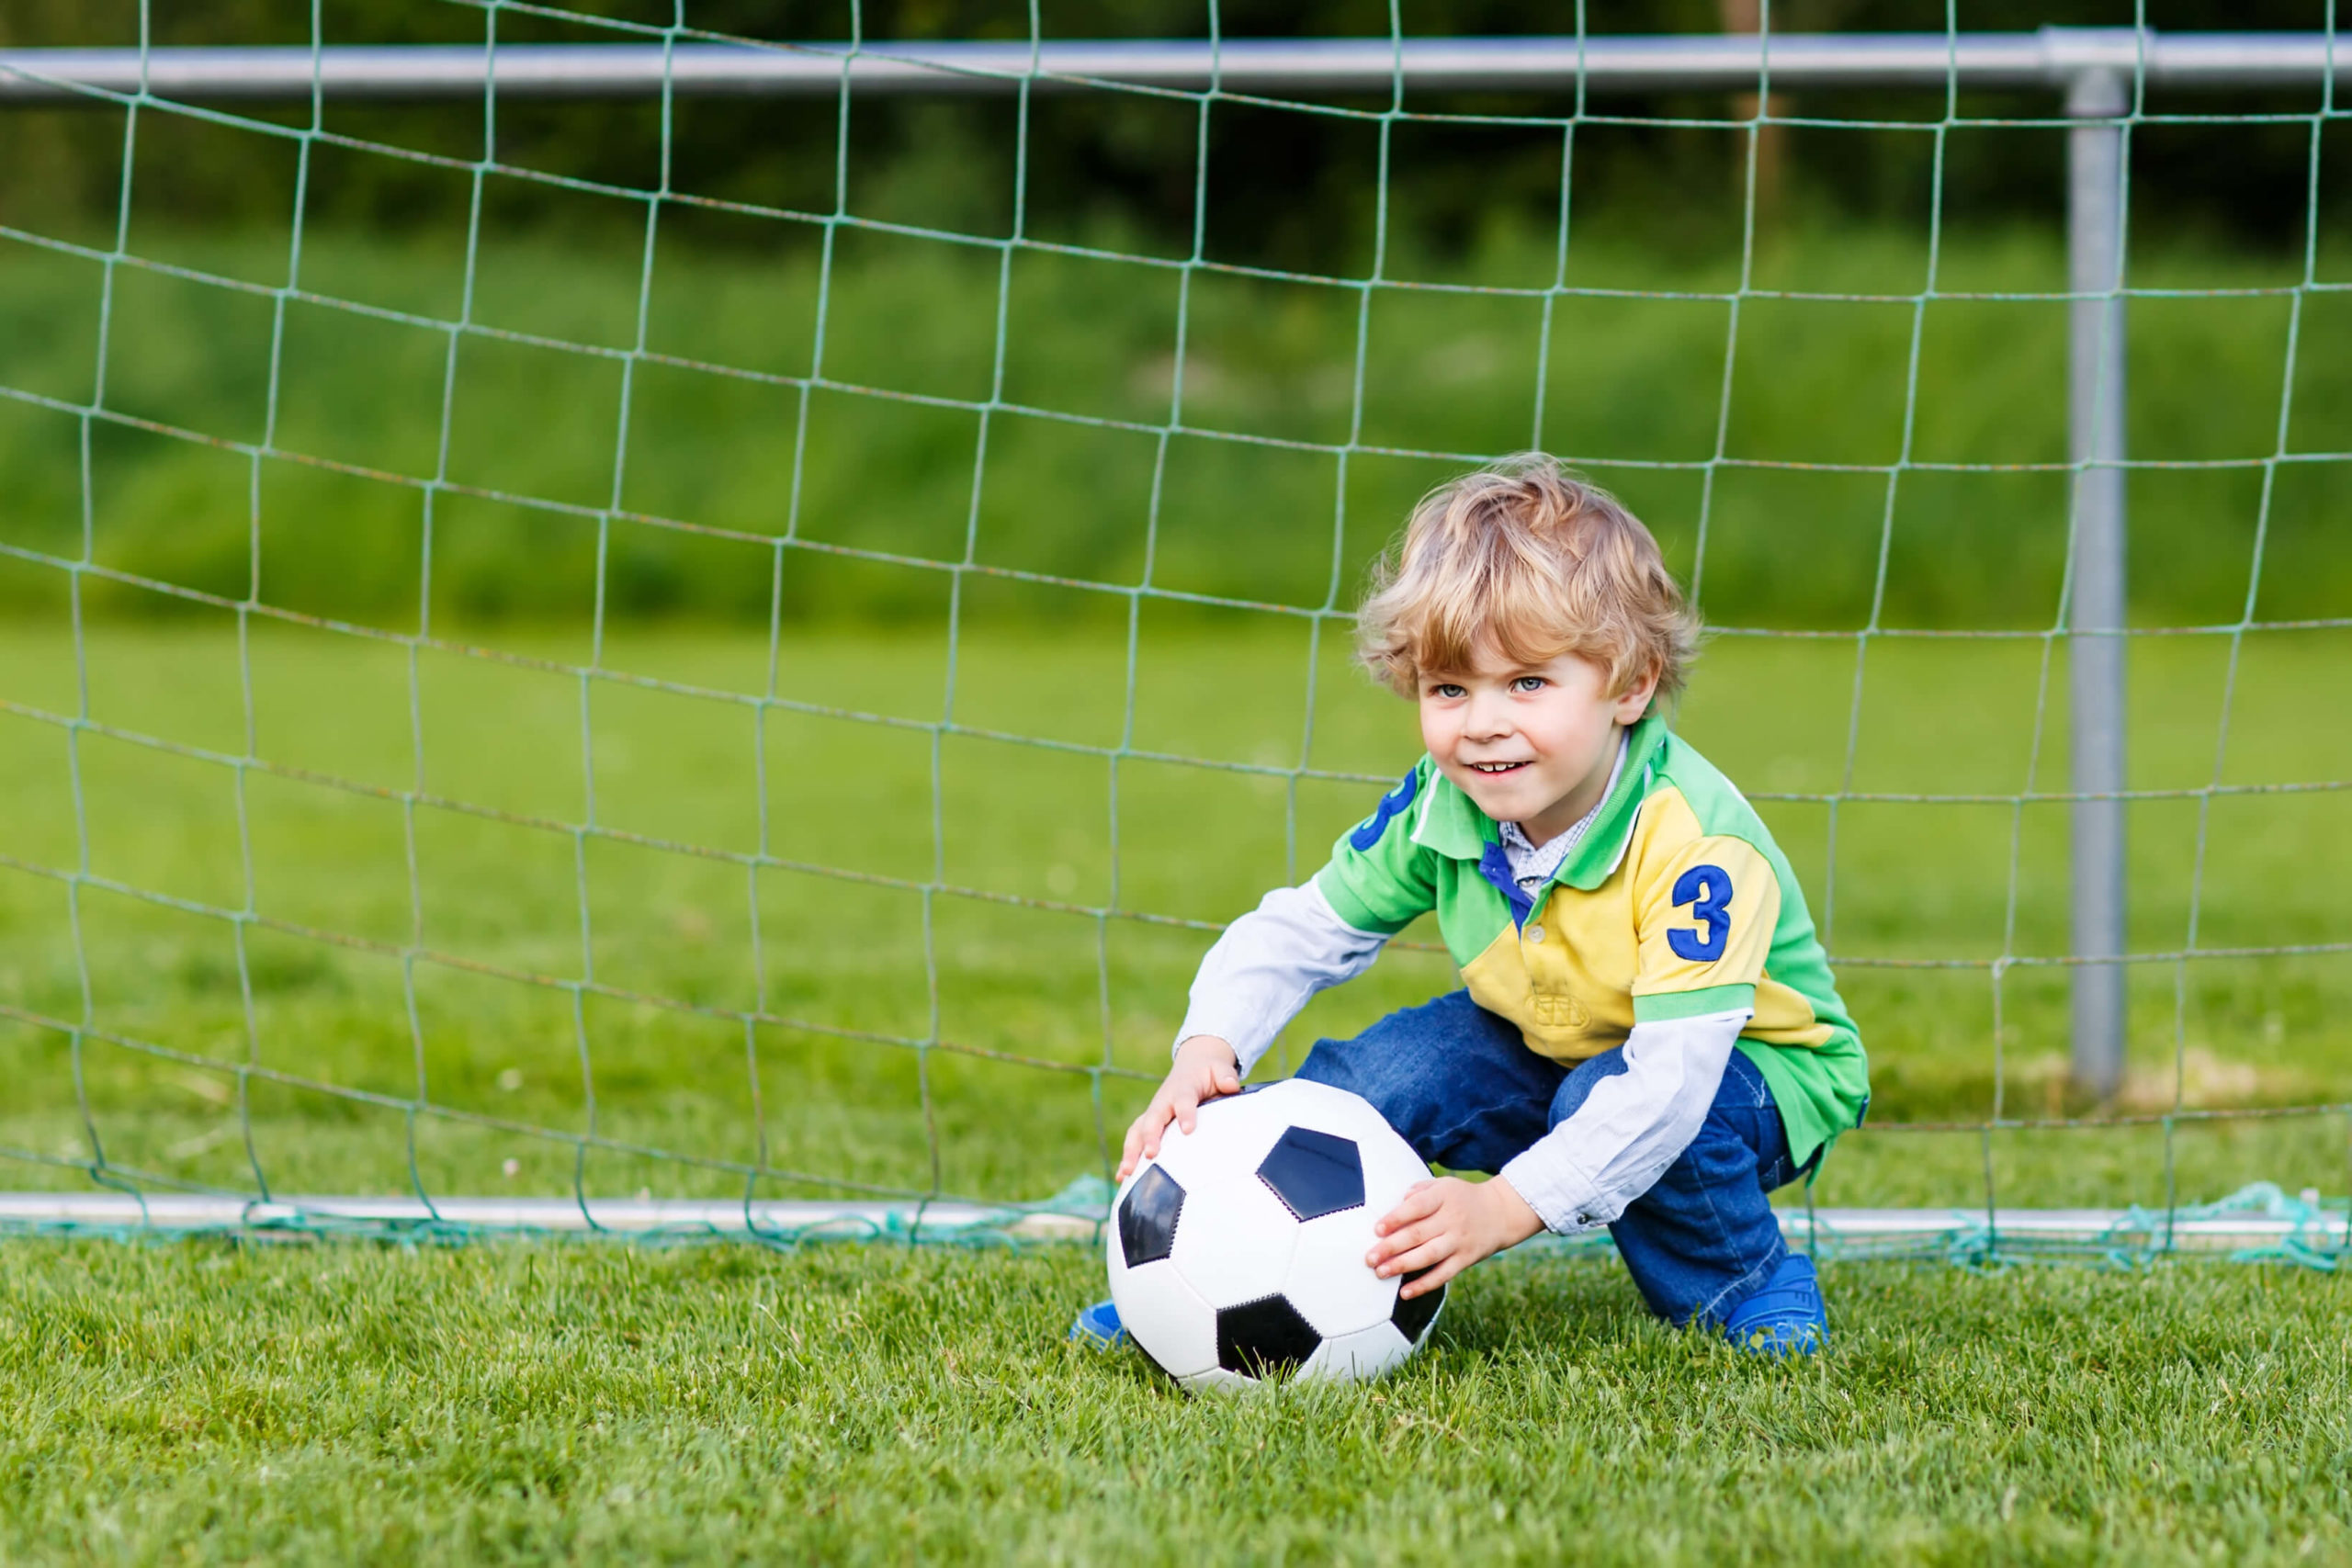 Young toddler on soccer field with soccer ball